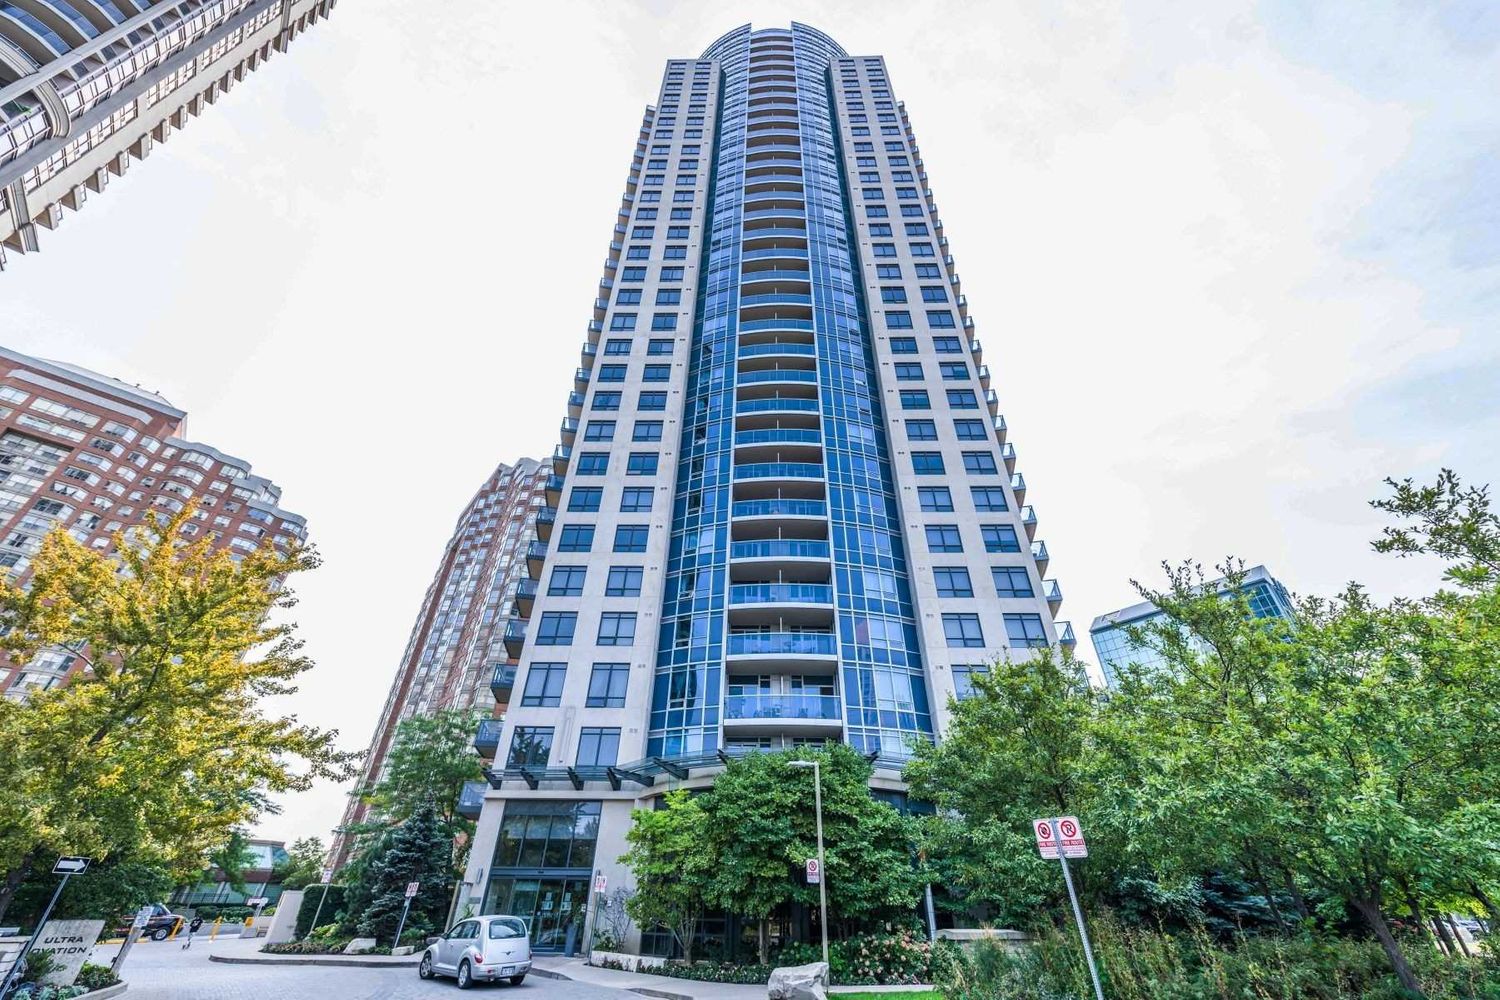 330 Burnhamthorpe Road W. Ultra Ovation at City Centre Condos is located in  Mississauga, Toronto - image #2 of 2